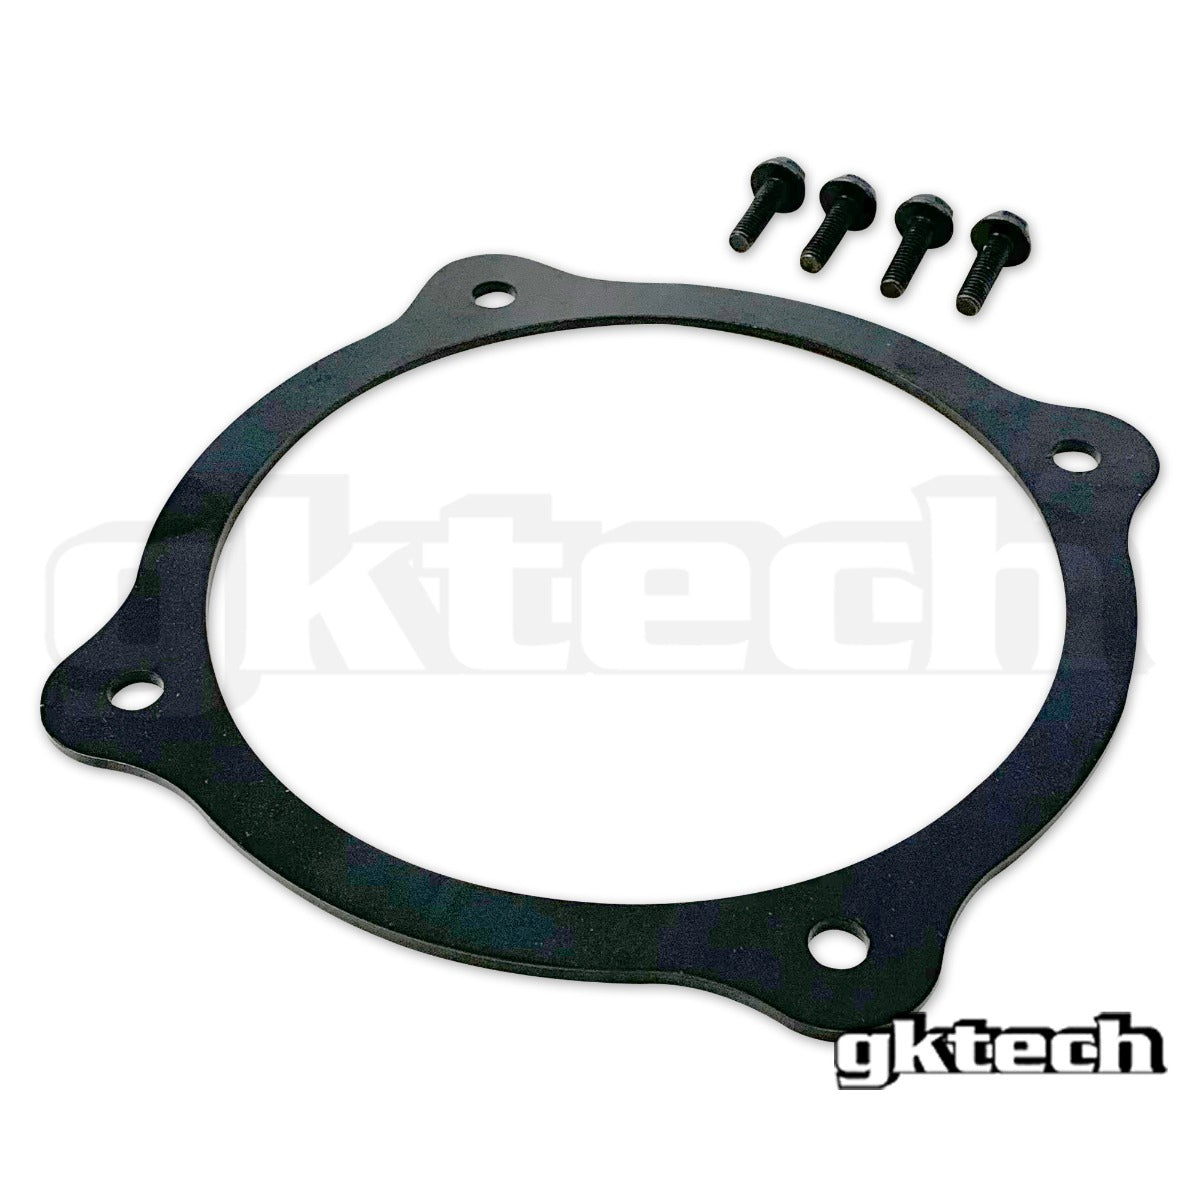 S/R chassis gearbox lower shift boot retainer